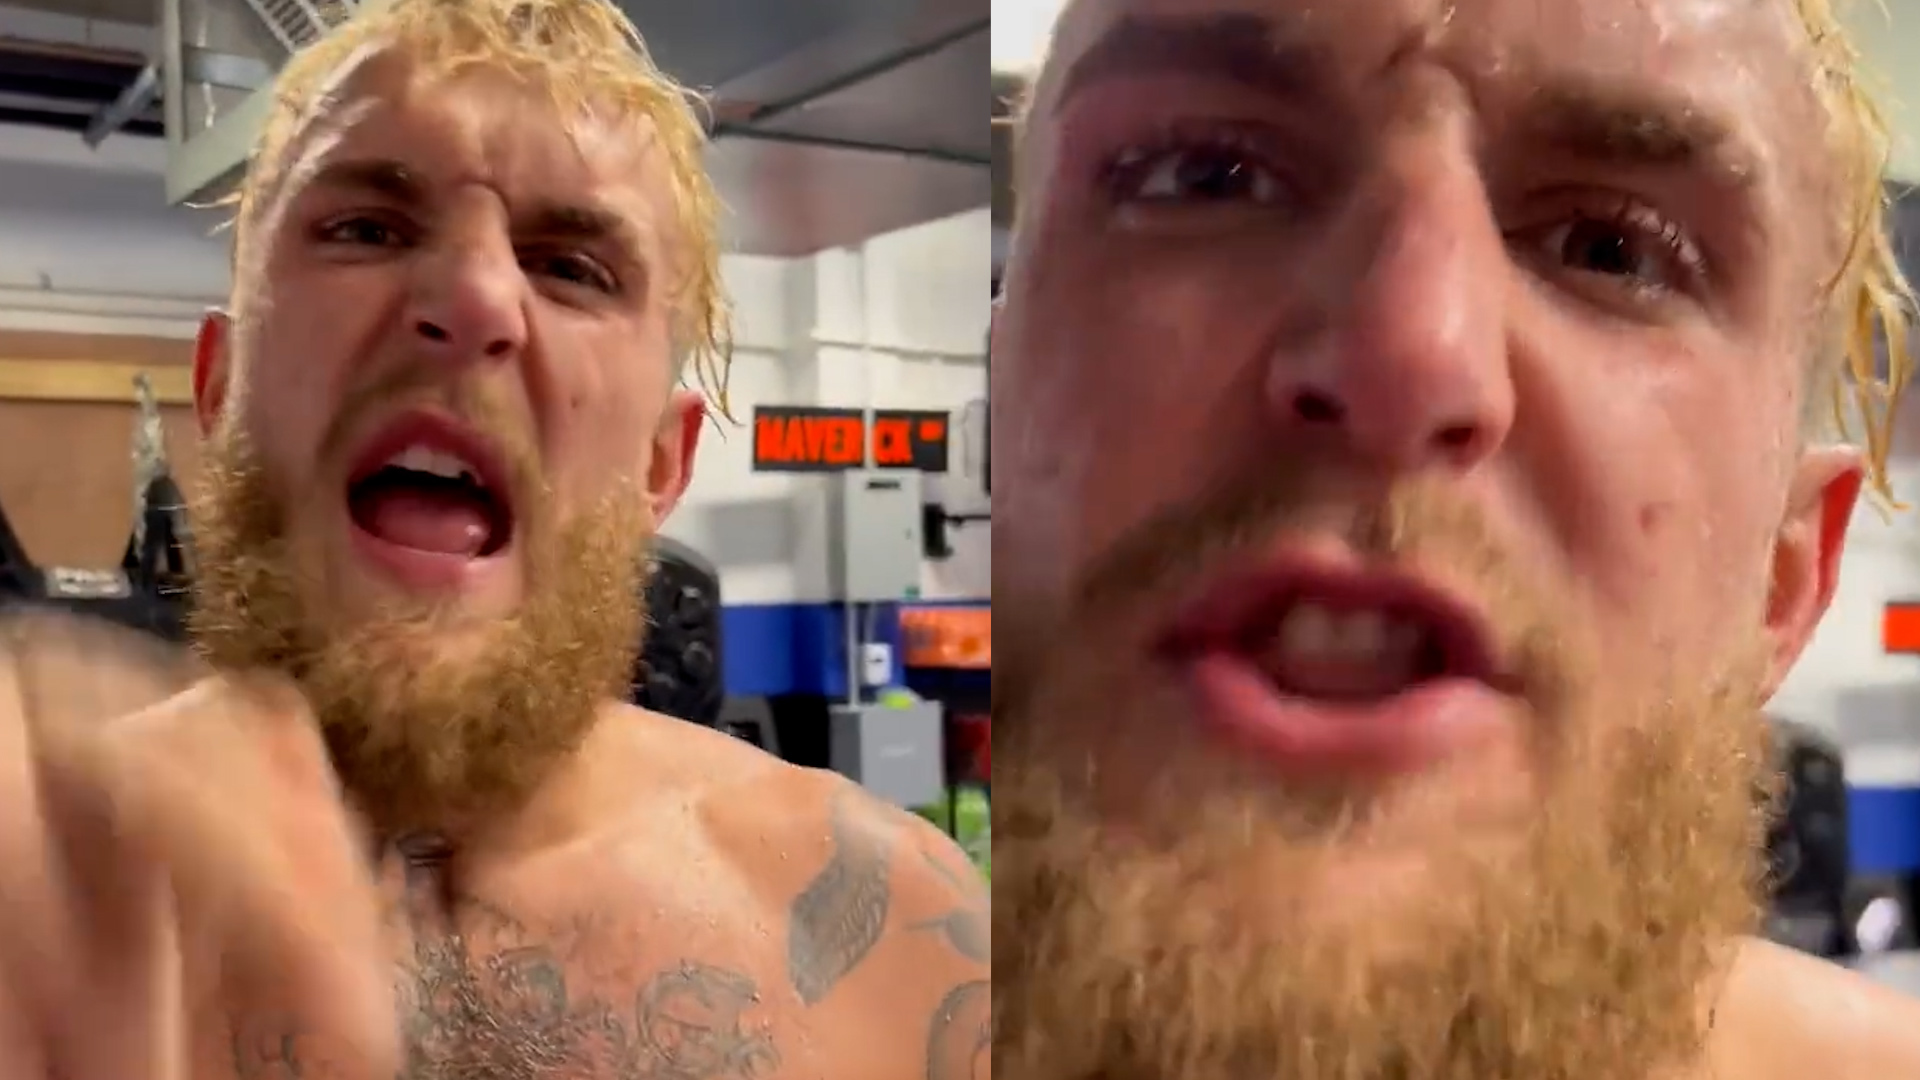 Jake Pauls gets hyped up for fight against Silva: "I'm coming for you baby"